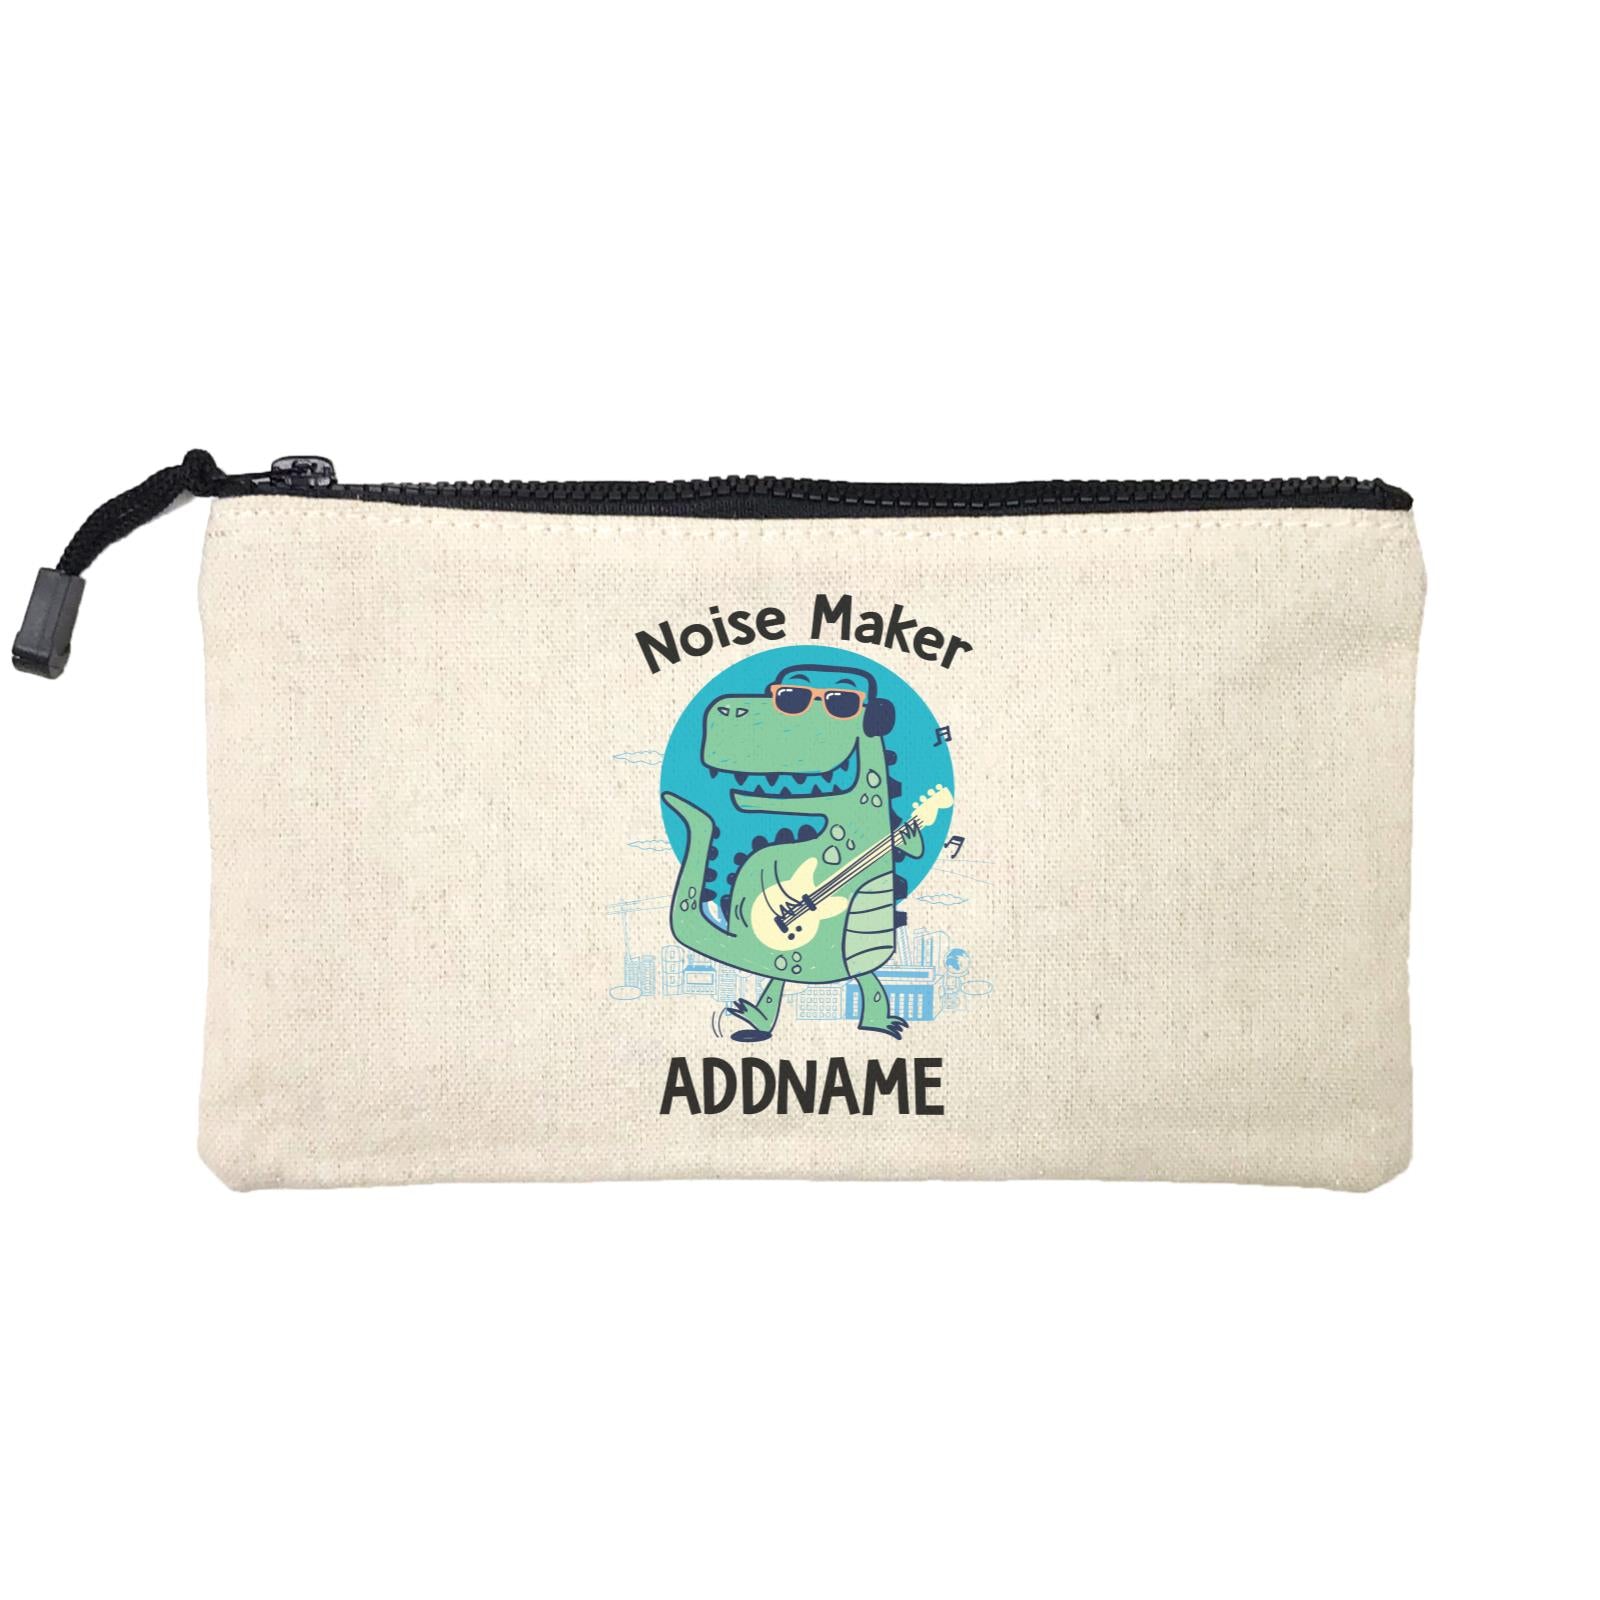 Cool Vibrant Series Noise Maker Rockstar Dinosaur Addname Mini Accessories Stationery Pouch